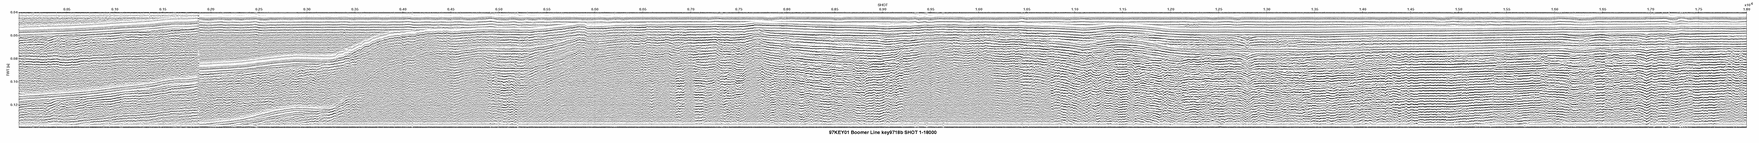 Thumbnail GIF image of the seismic trackline key9718b, with a hotlink to the more detailed, larger JPG image.